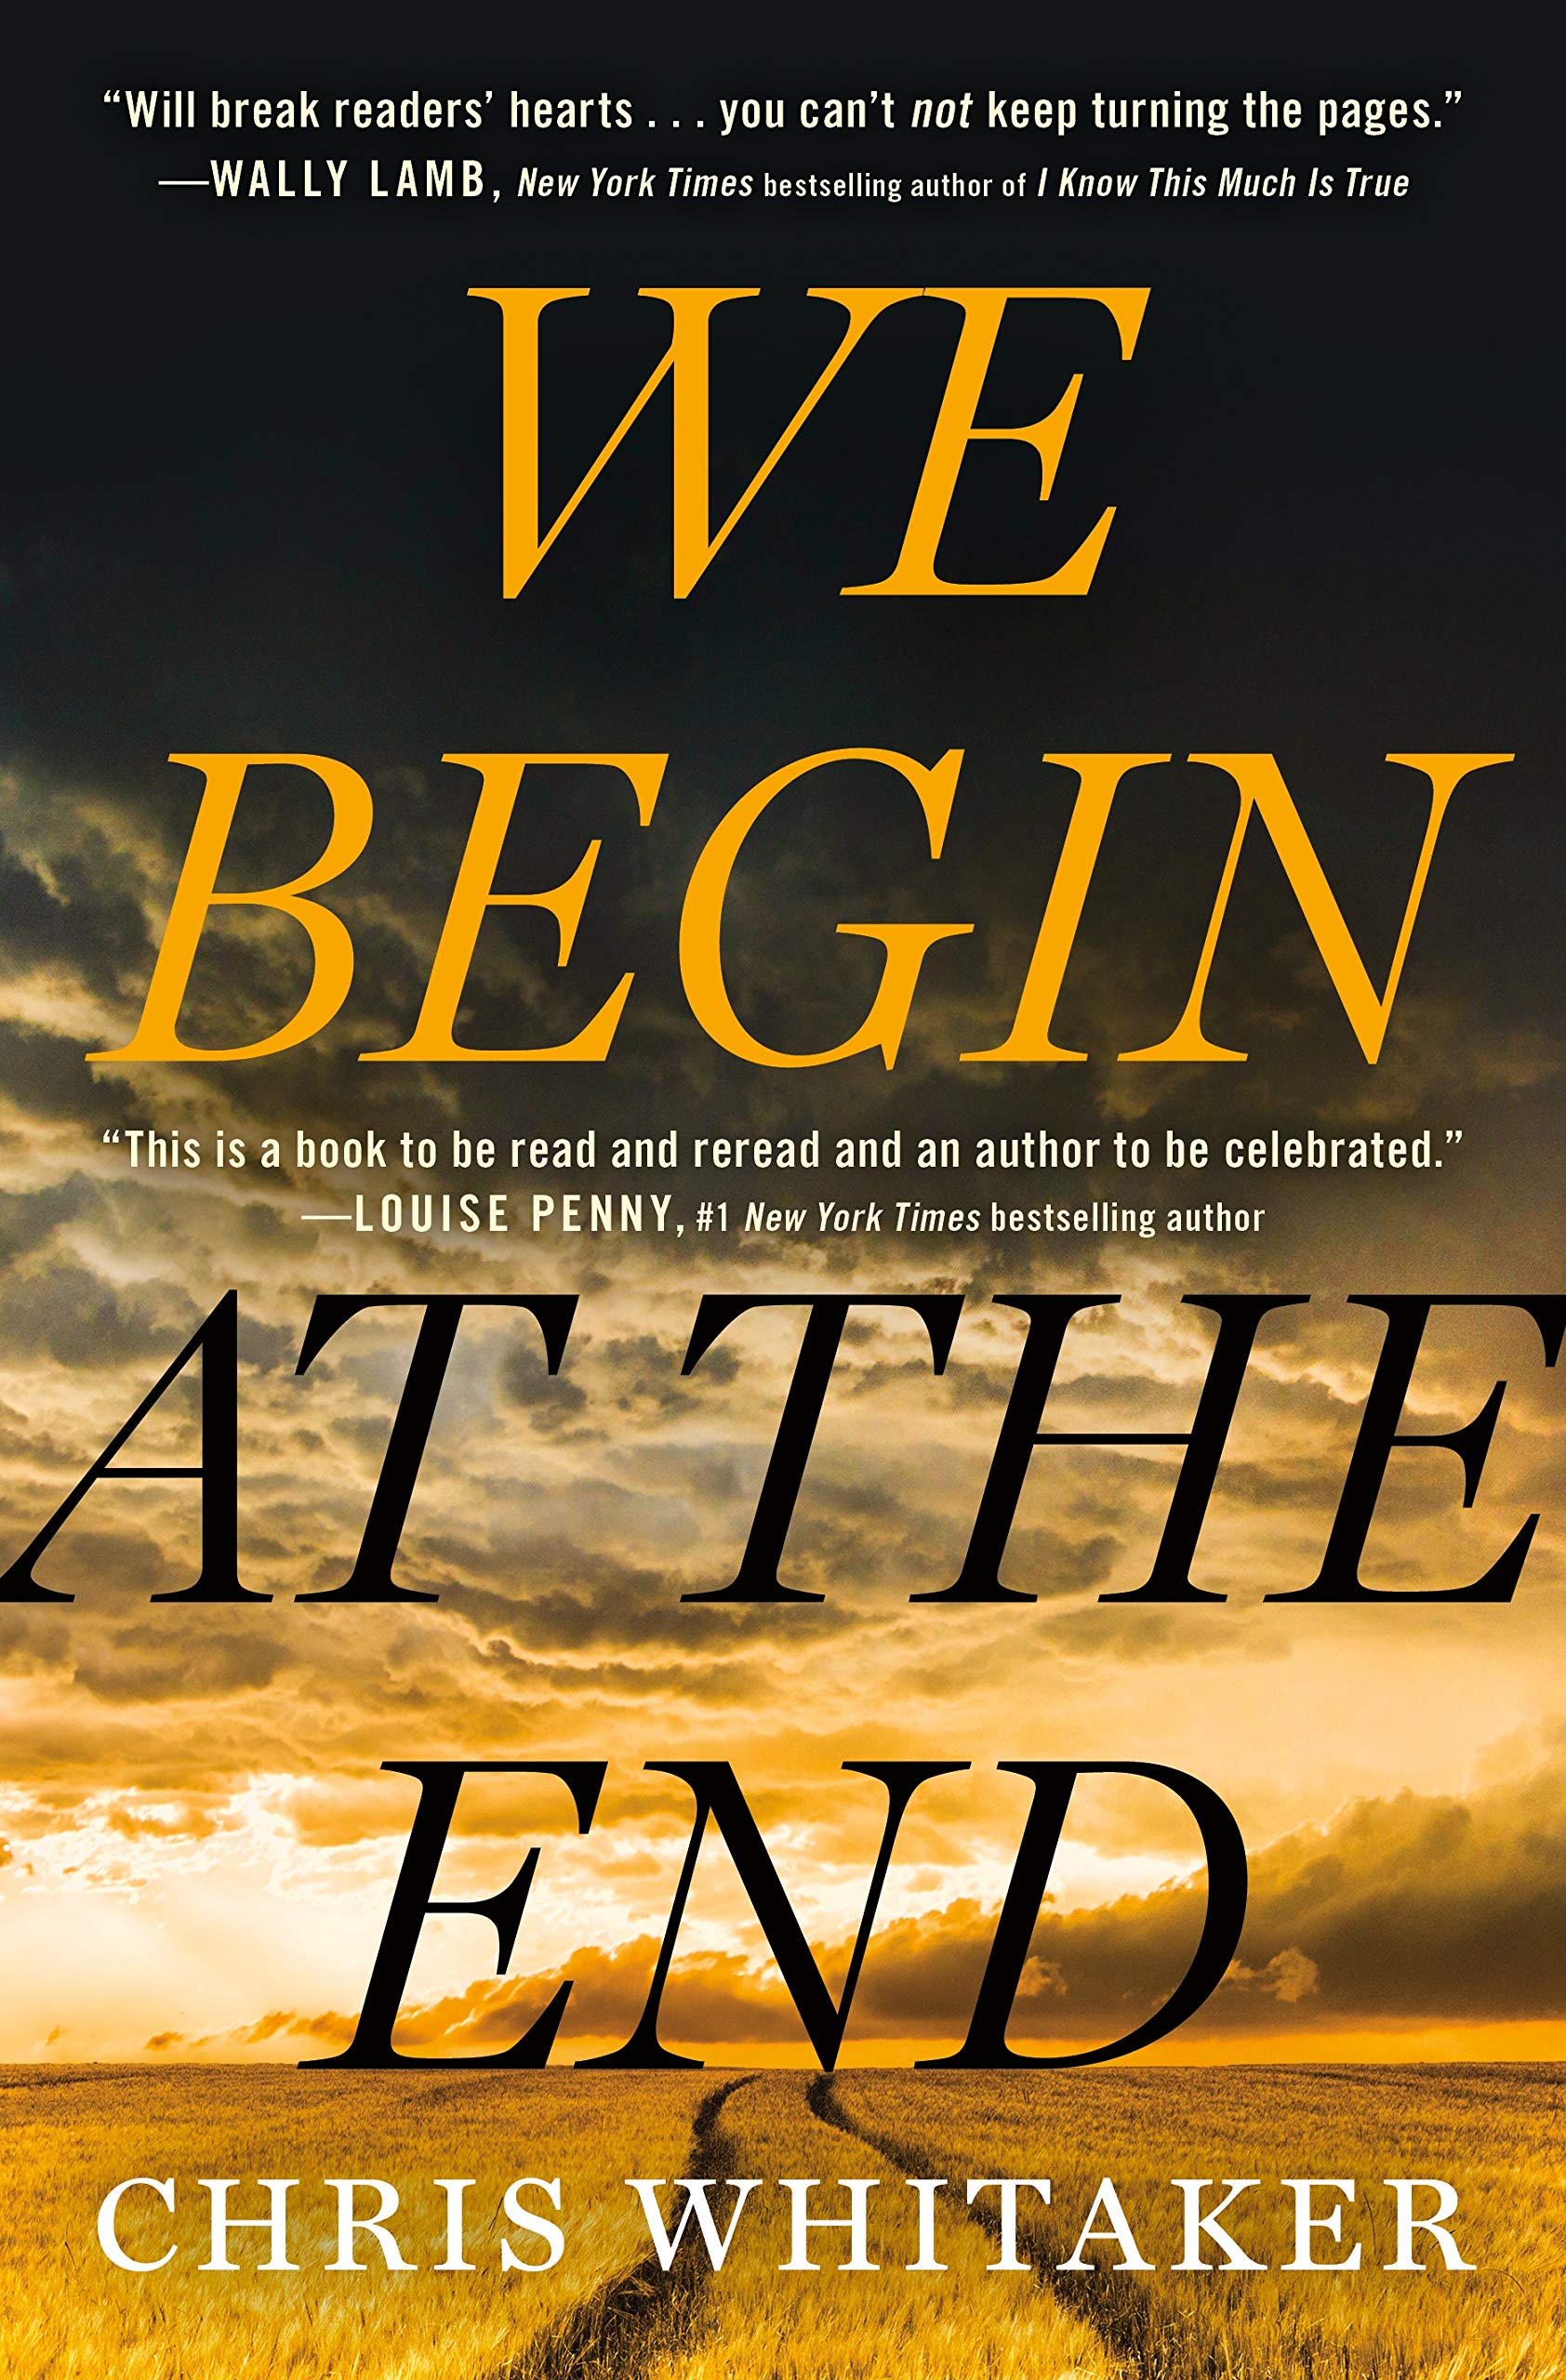 Cover of We Begin at the End by Chris Whitaker